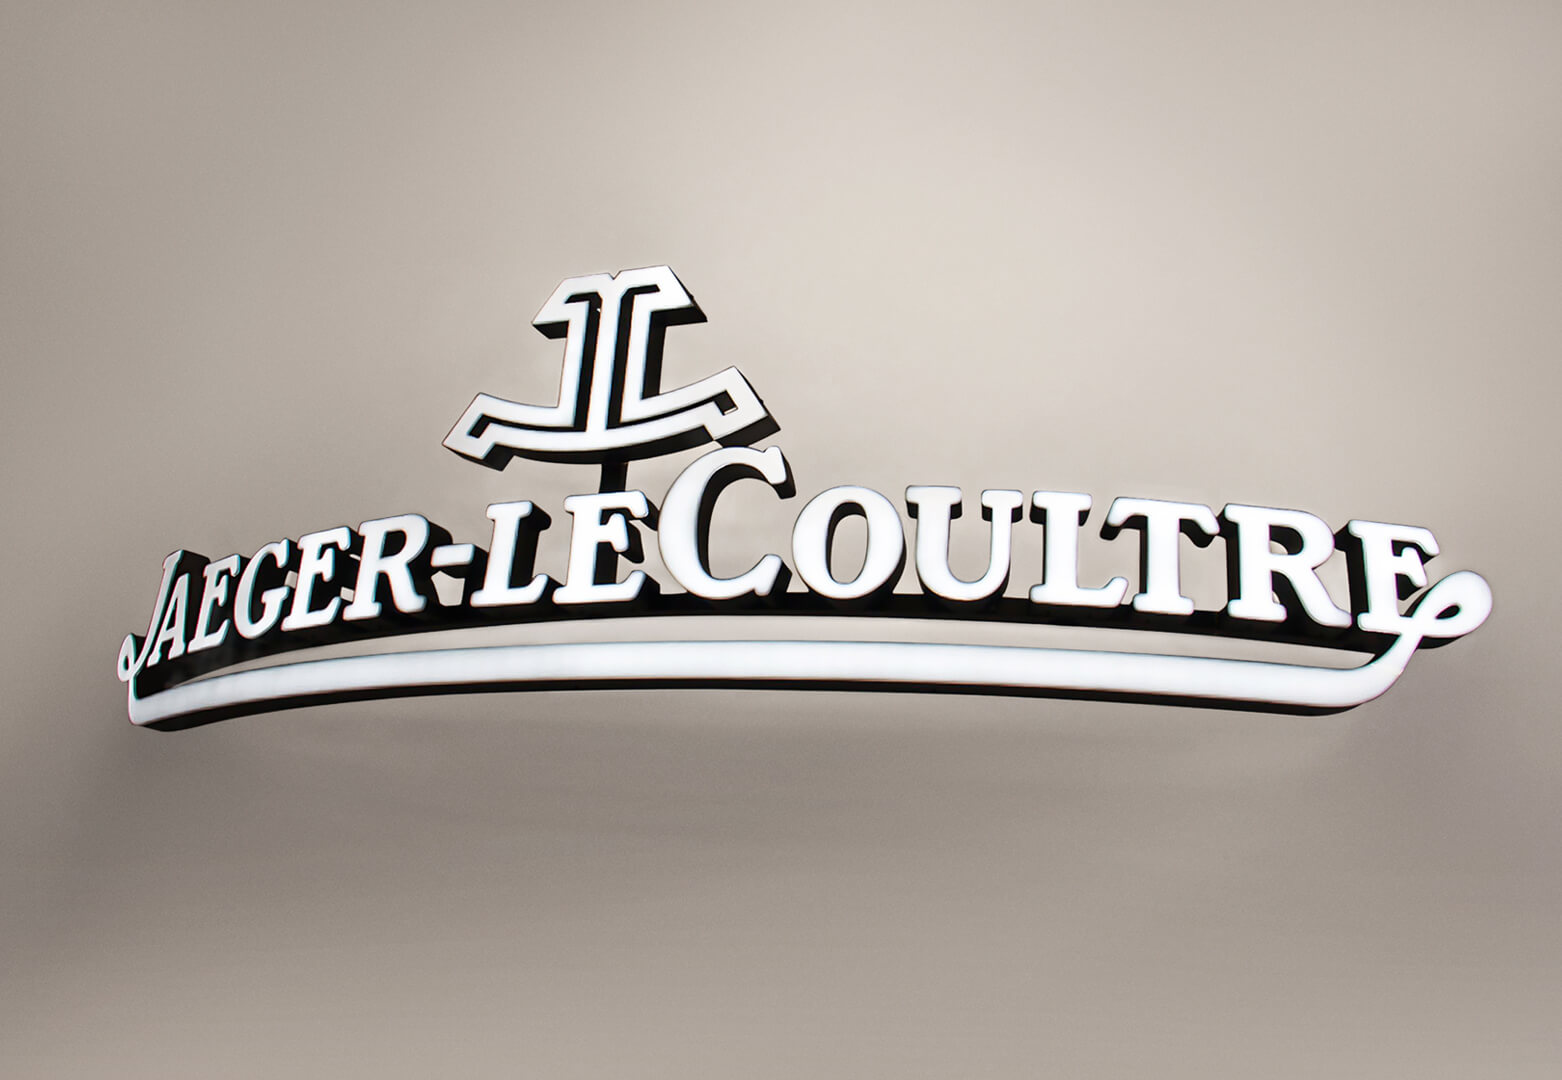 Jaeger-LeCoultre - Logo in arc, shining front in white color